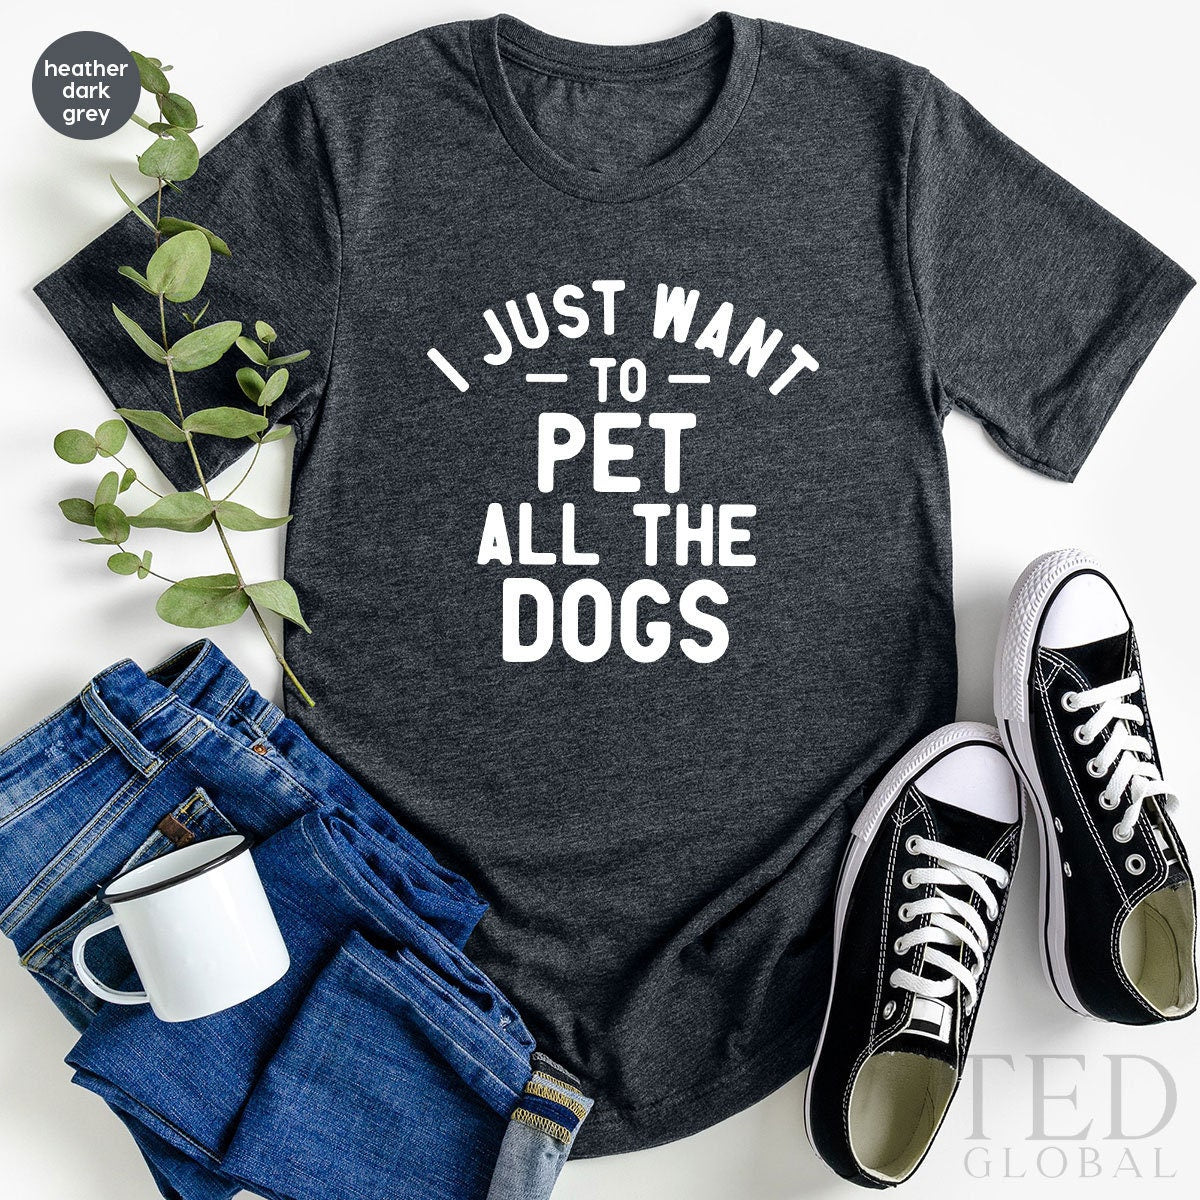 Pet Lover Shirt, Dog Mom Shirt, I Just Want To Pet All The Dogs, Gift For Dog Lovers, Animal Lover T-Shirt, Dog Dad TShirt, Dog Lover Gift - Fastdeliverytees.com